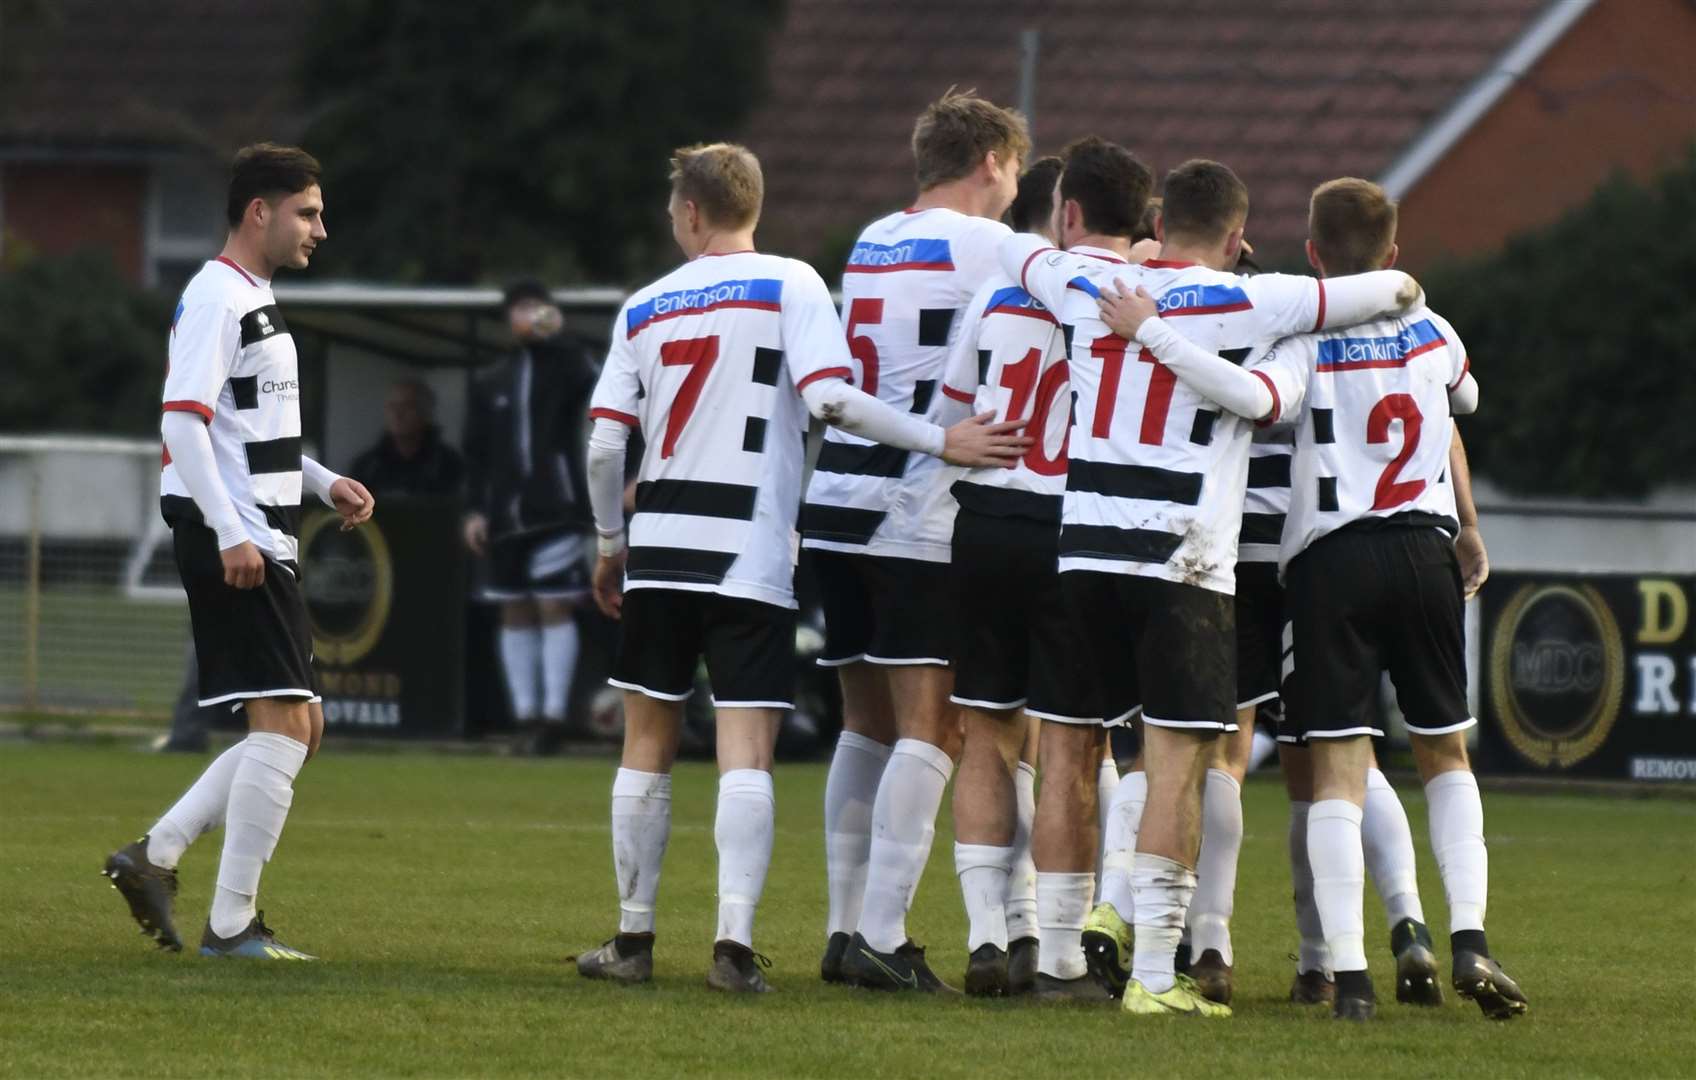 Deal Town fans can watch their team's FA Vase match online Picture: Tony Flashman